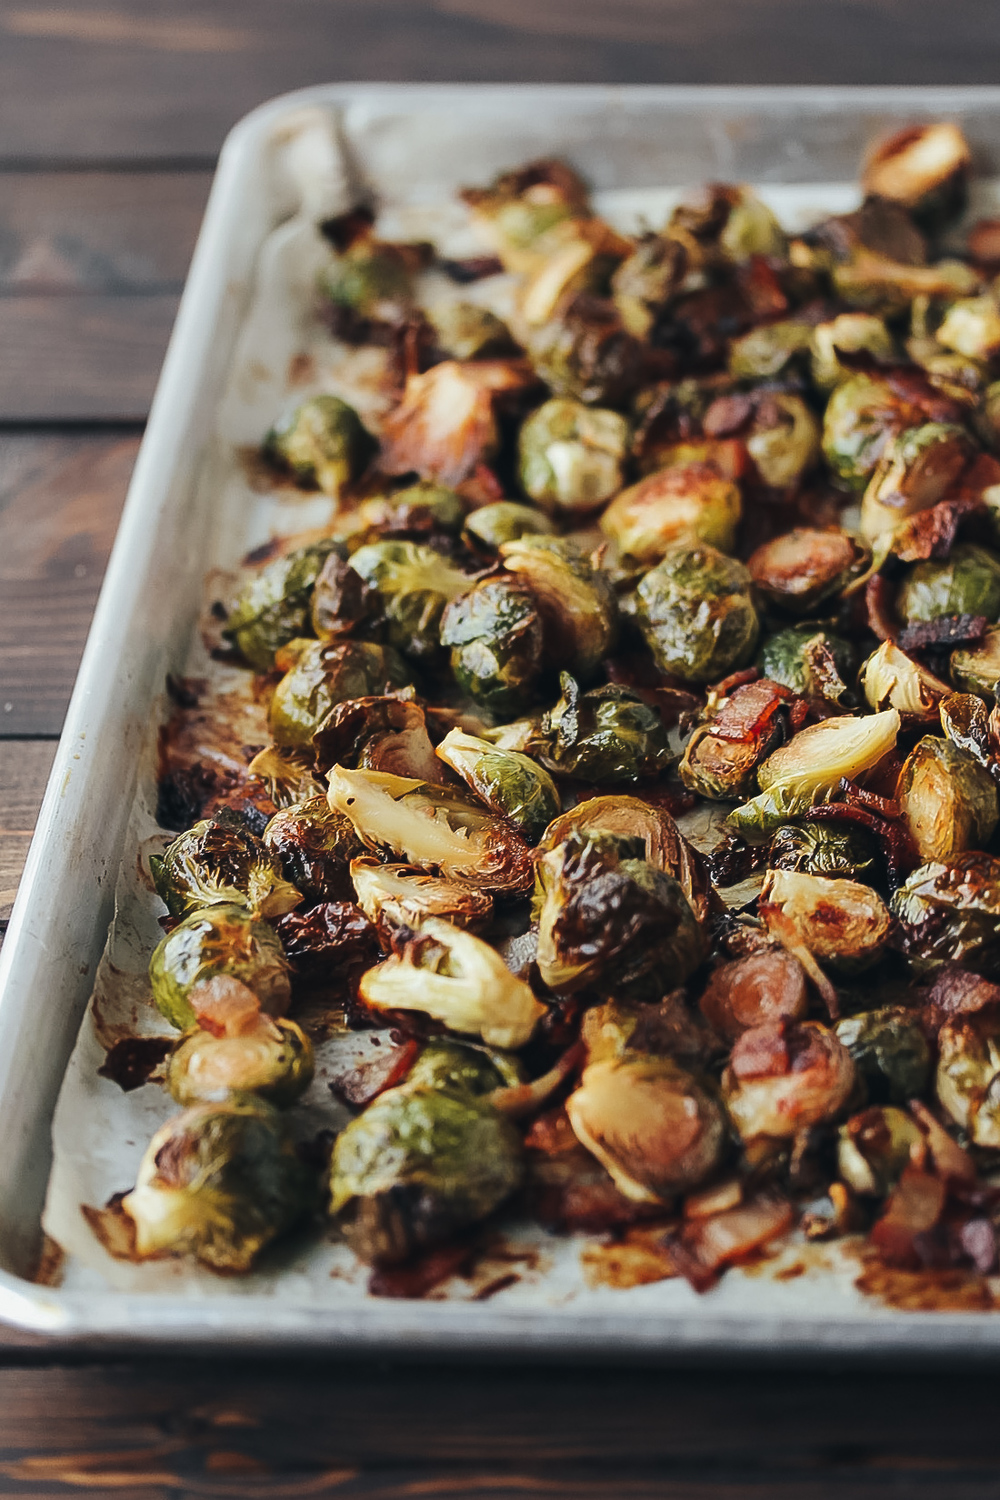 roasted brussels